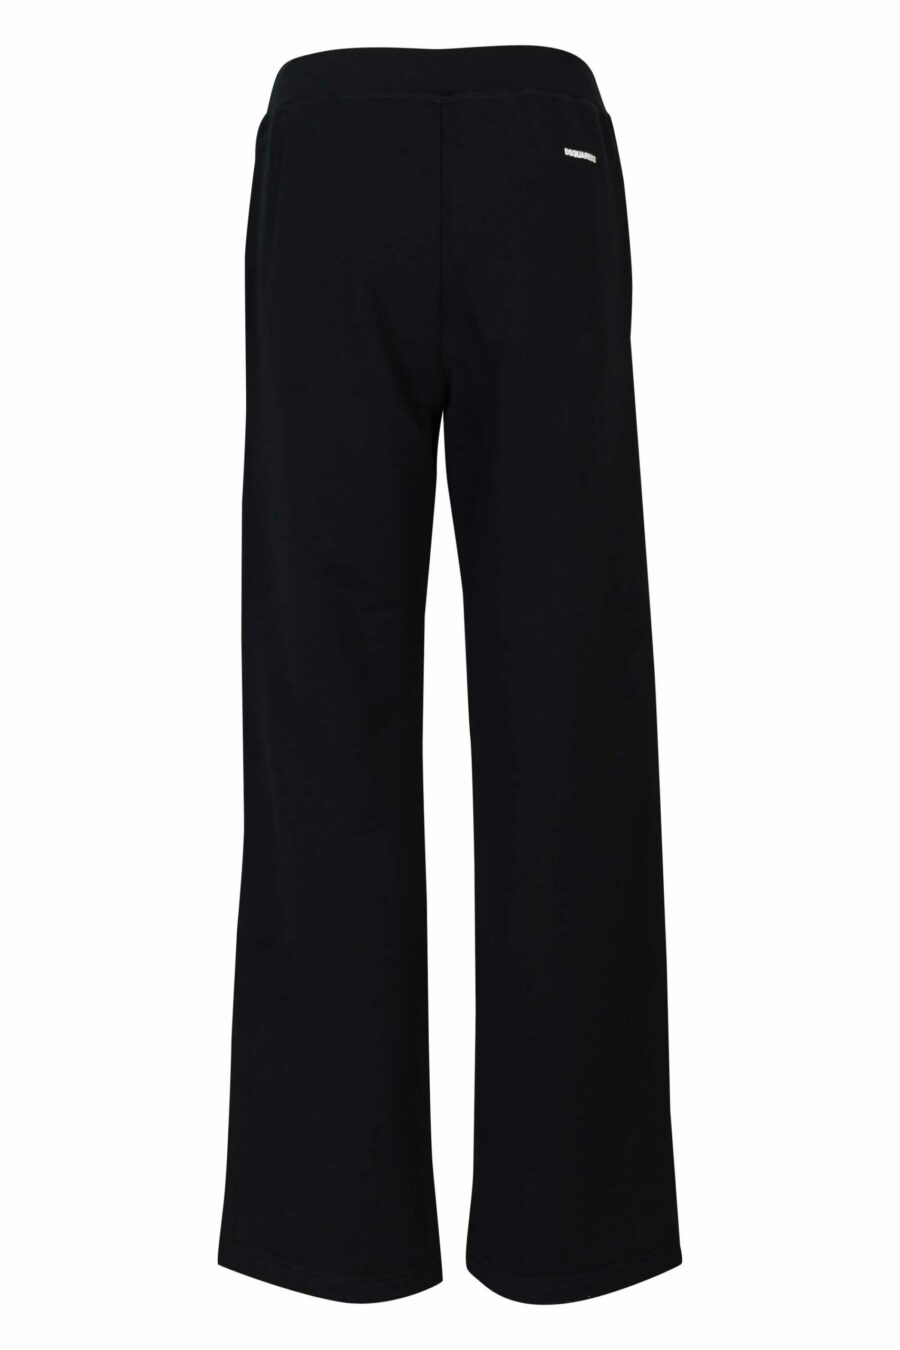 Wide black trousers with logo - 8054148457945 2 scaled